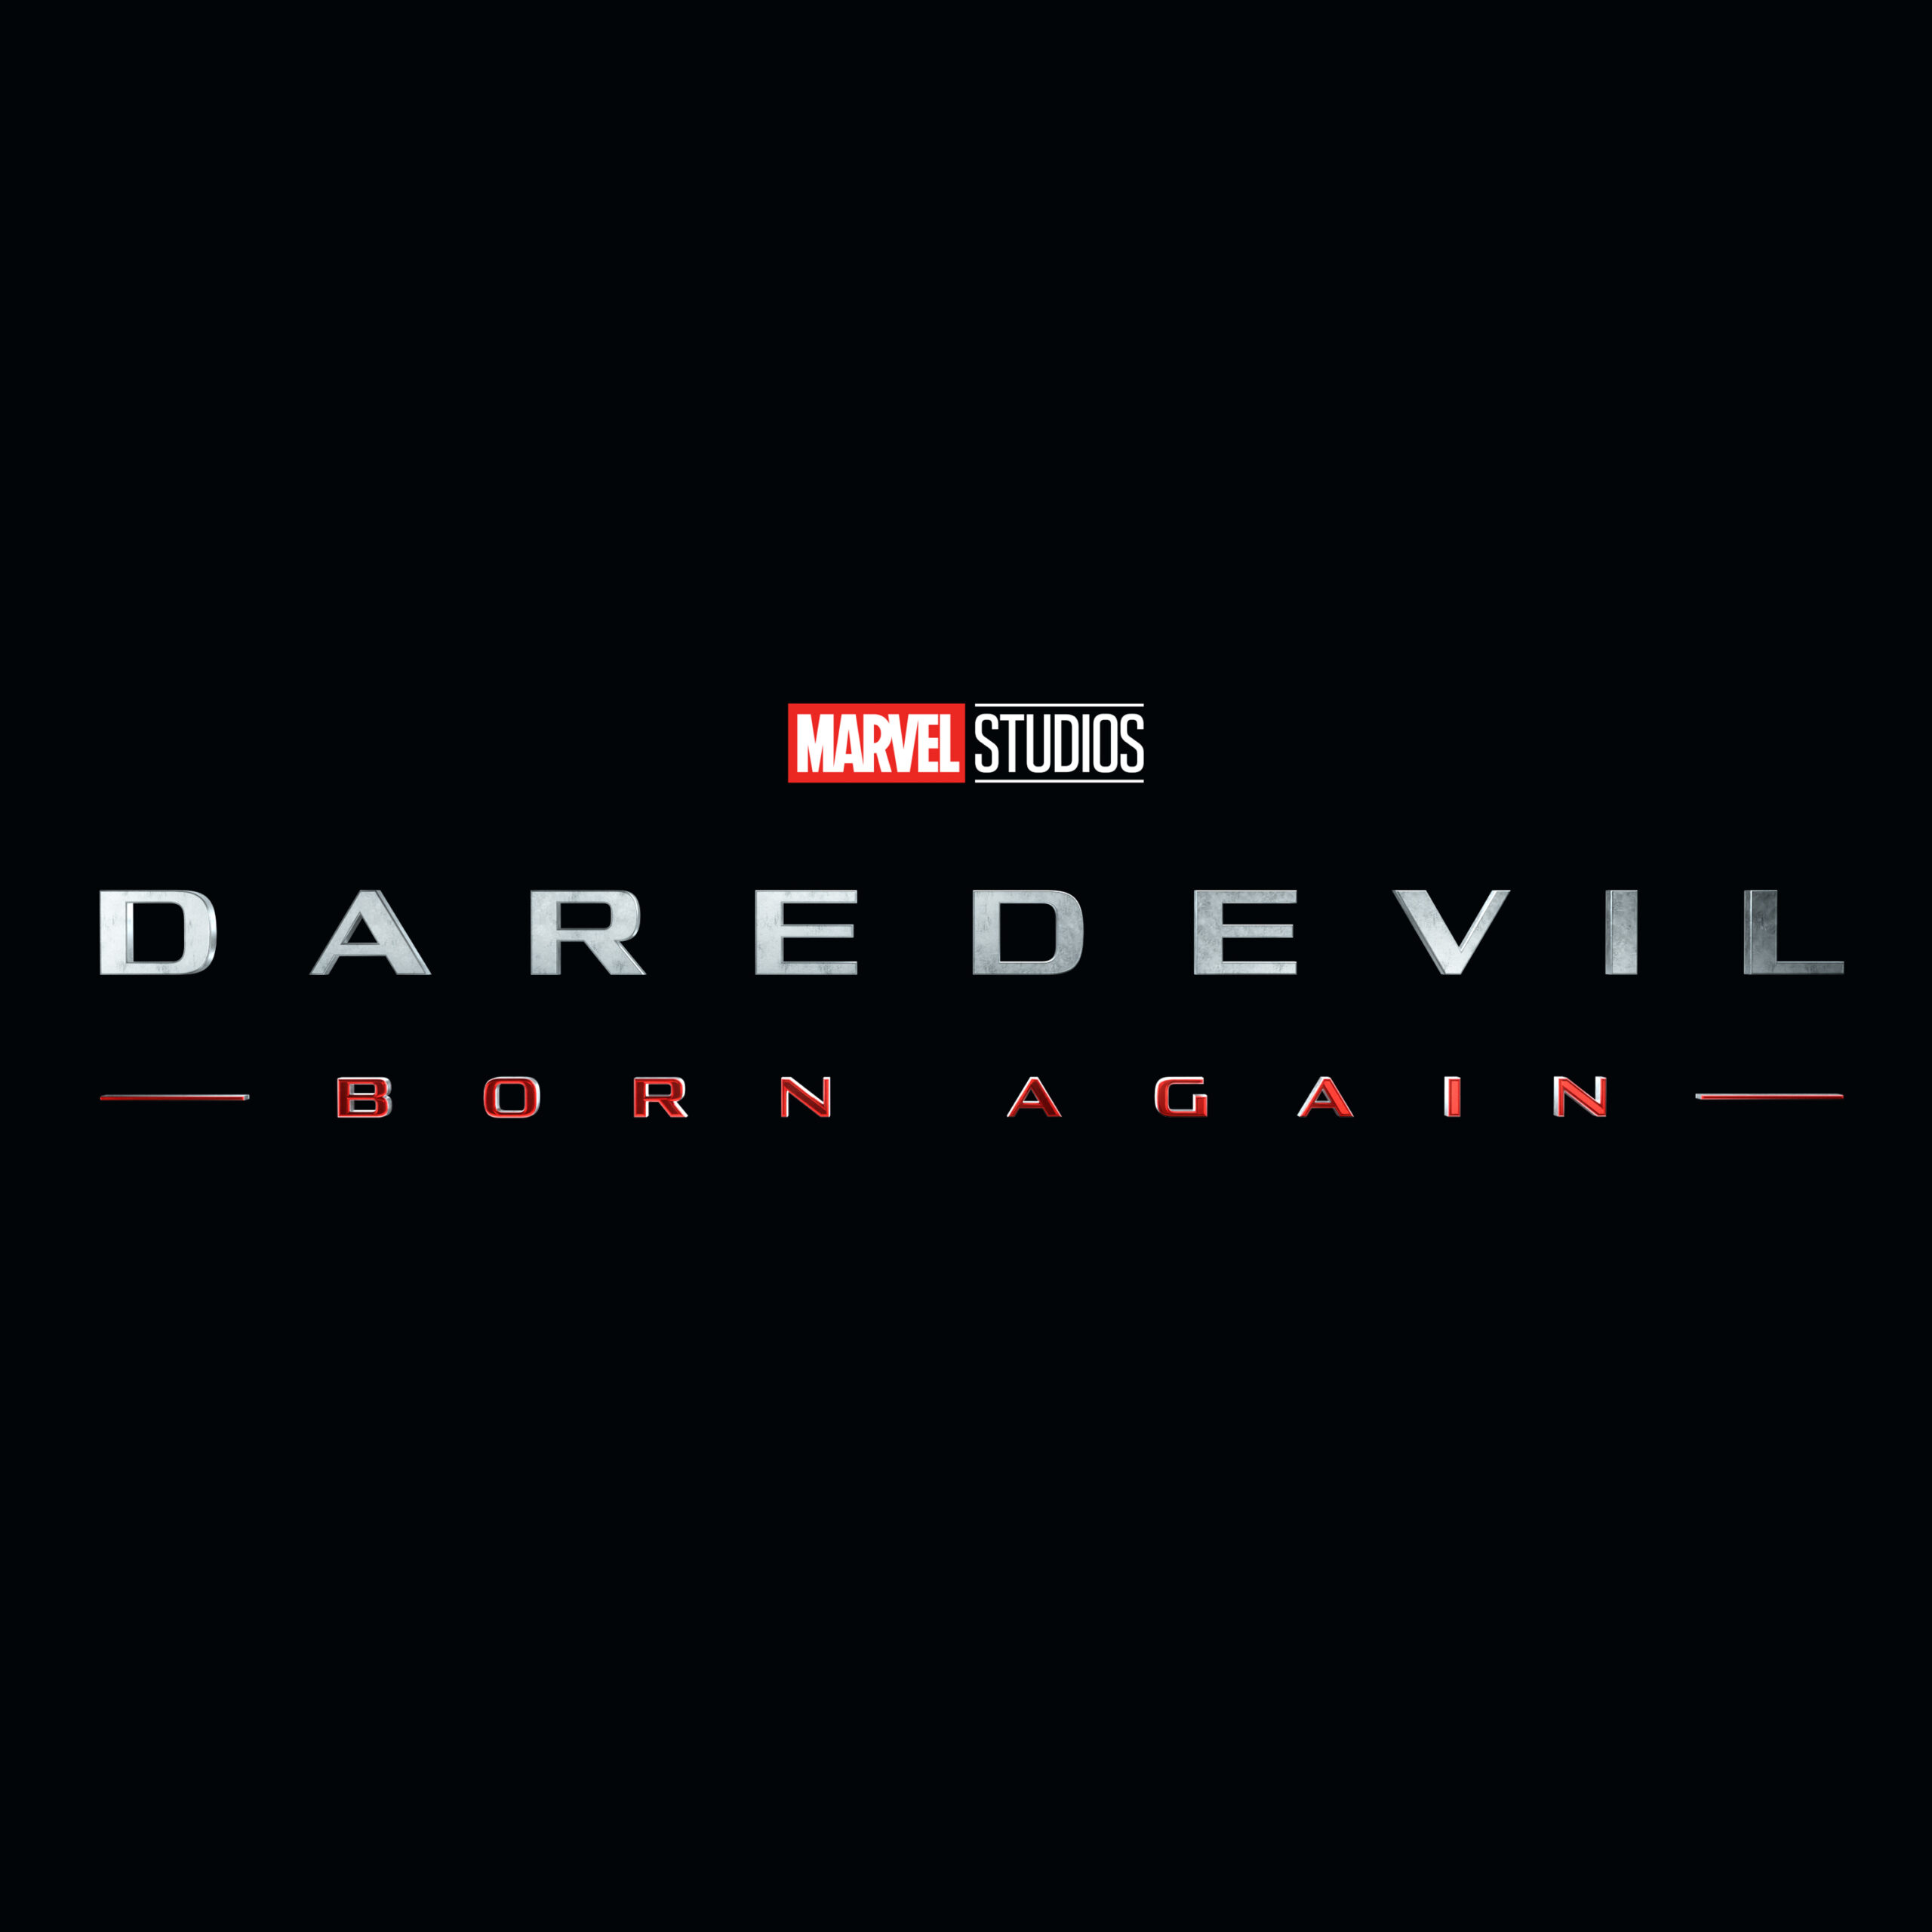 Disney+ Content Slow Down And More Episodic Shows Like Daredevil: Born Again Says Kevin Feige